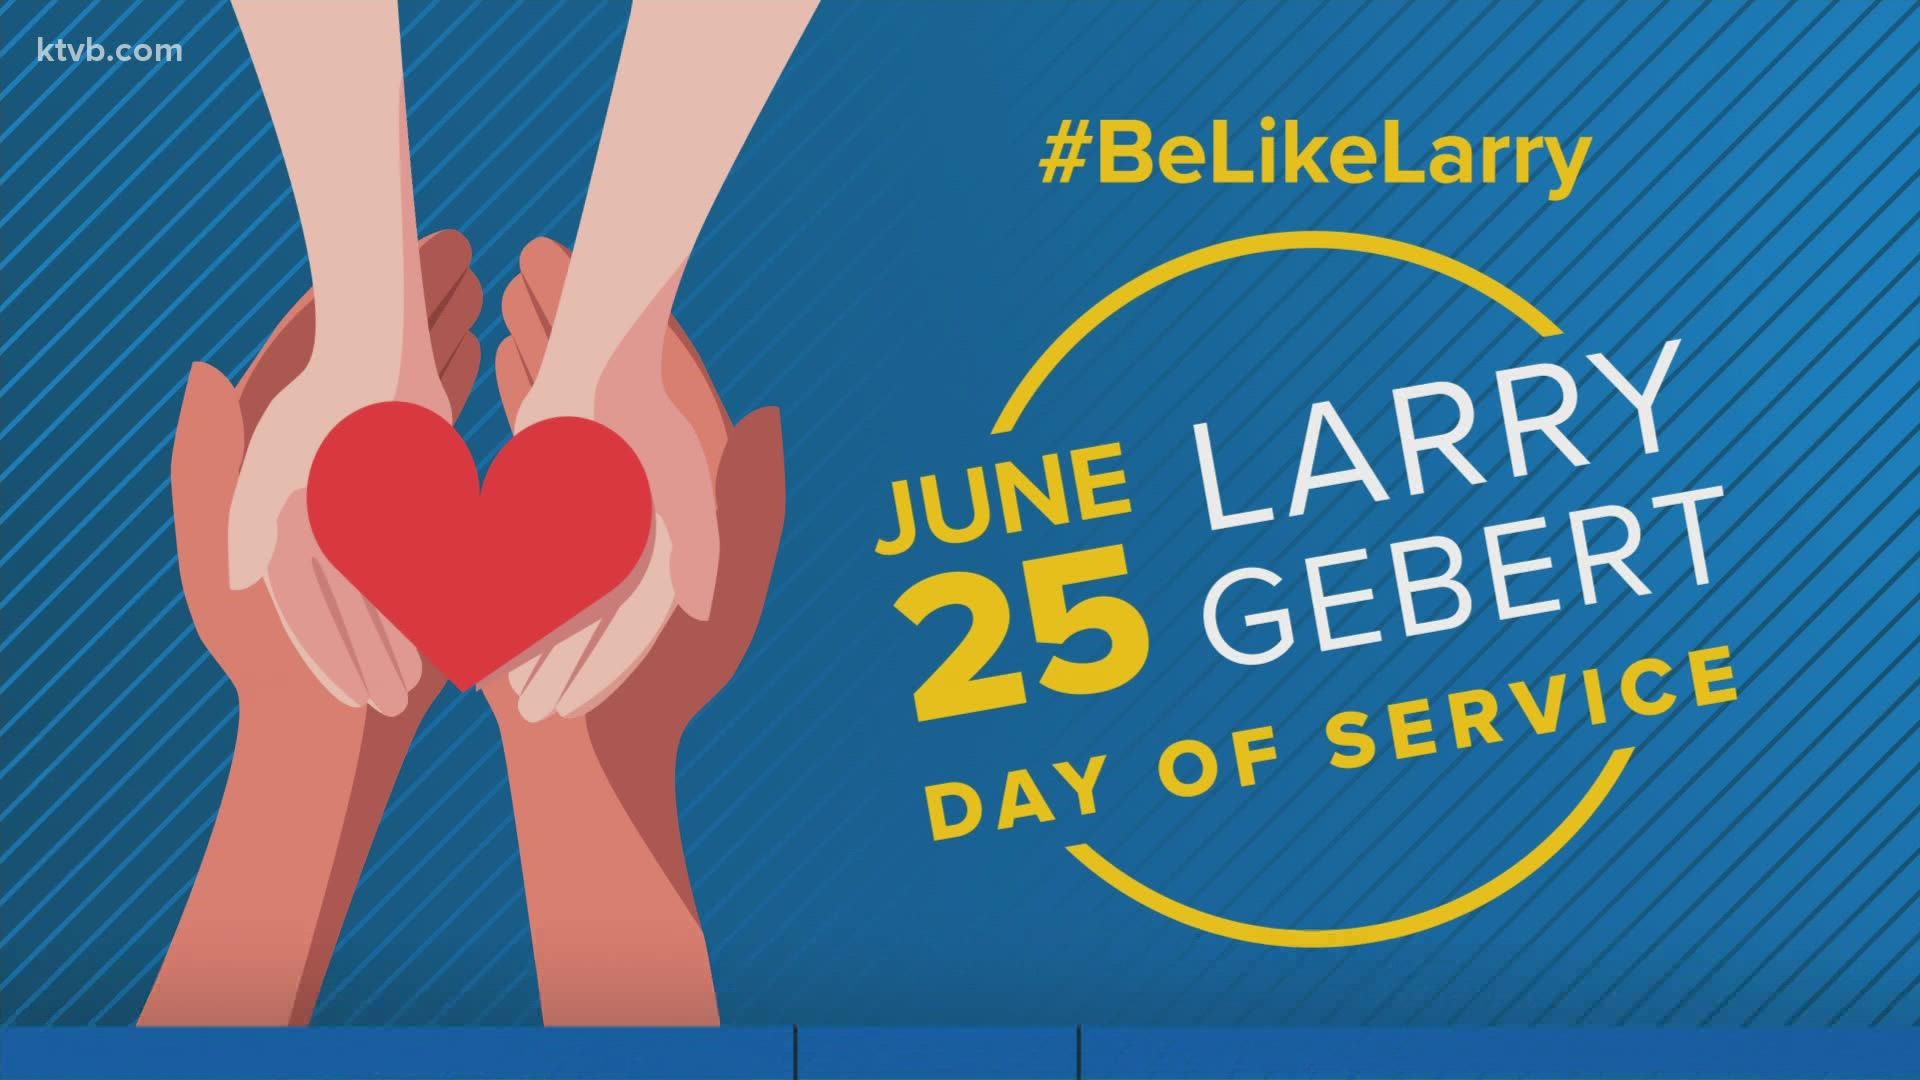 June 25 has been proclaimed Larry Gebert Day of Service in honor of our late friend, colleague, and community champion.